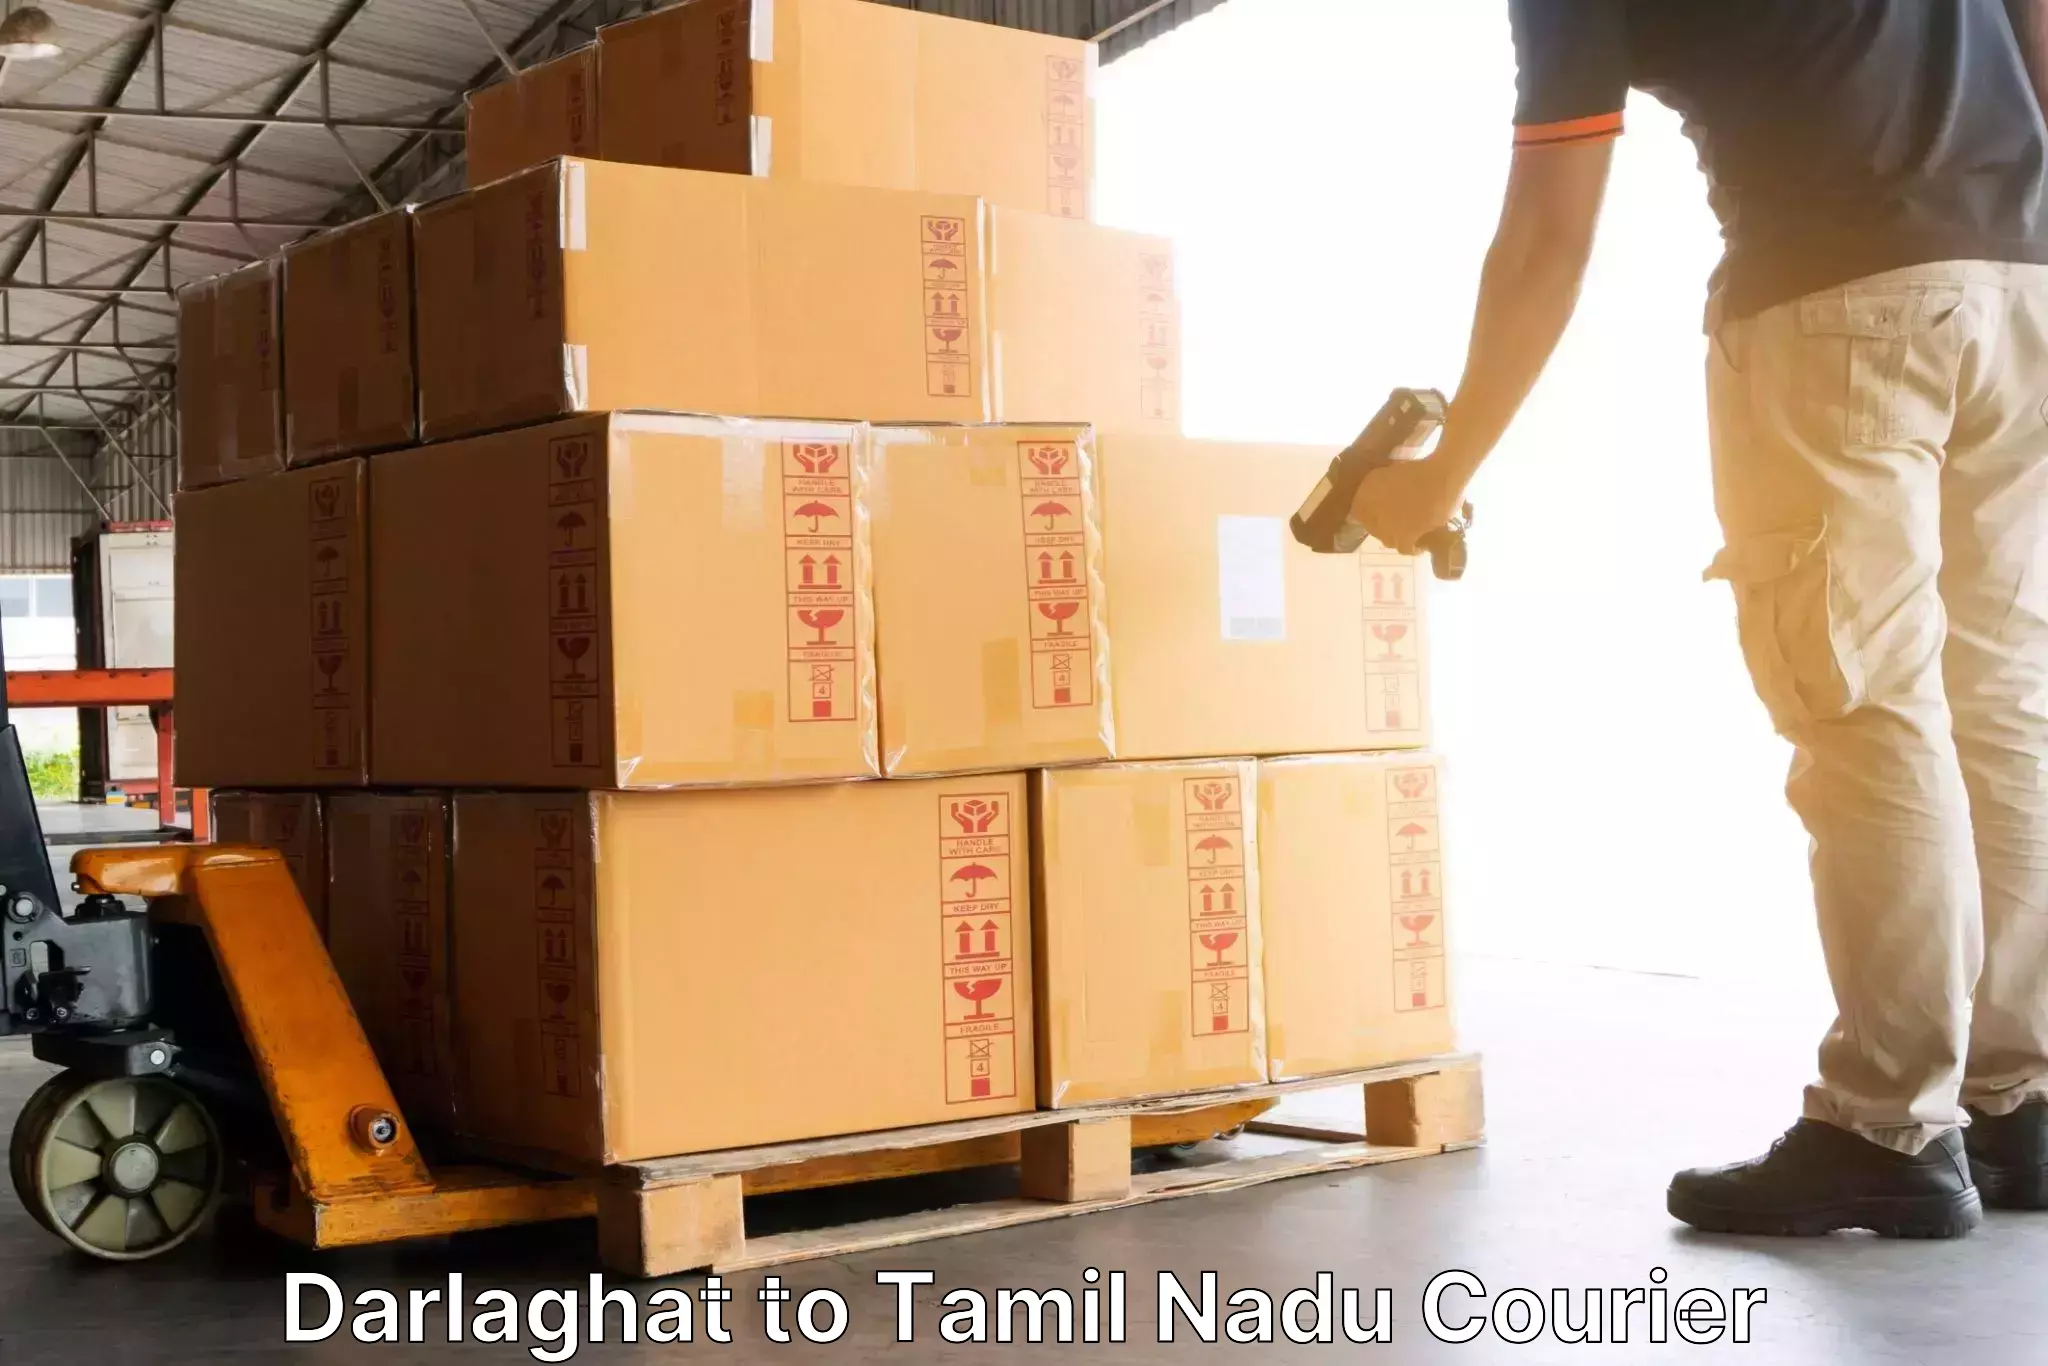 Courier tracking online Darlaghat to Tuticorin Port